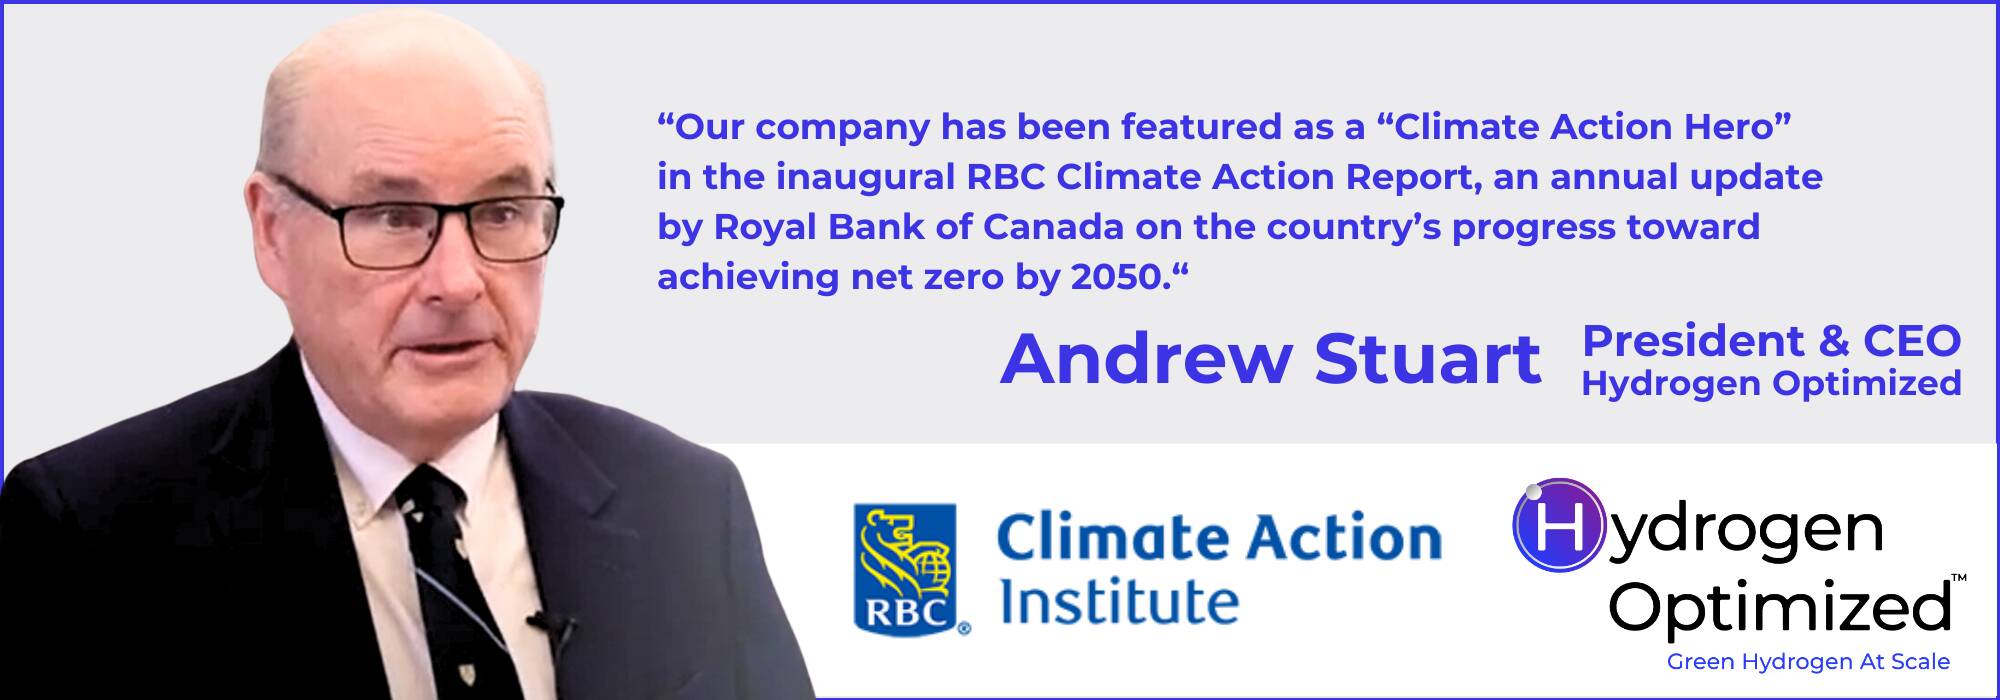 Headshot of Andrew Stuart with a quote from the RBC article about net zero with the Climate Action Institute and Hydrogen Optimized logos below.